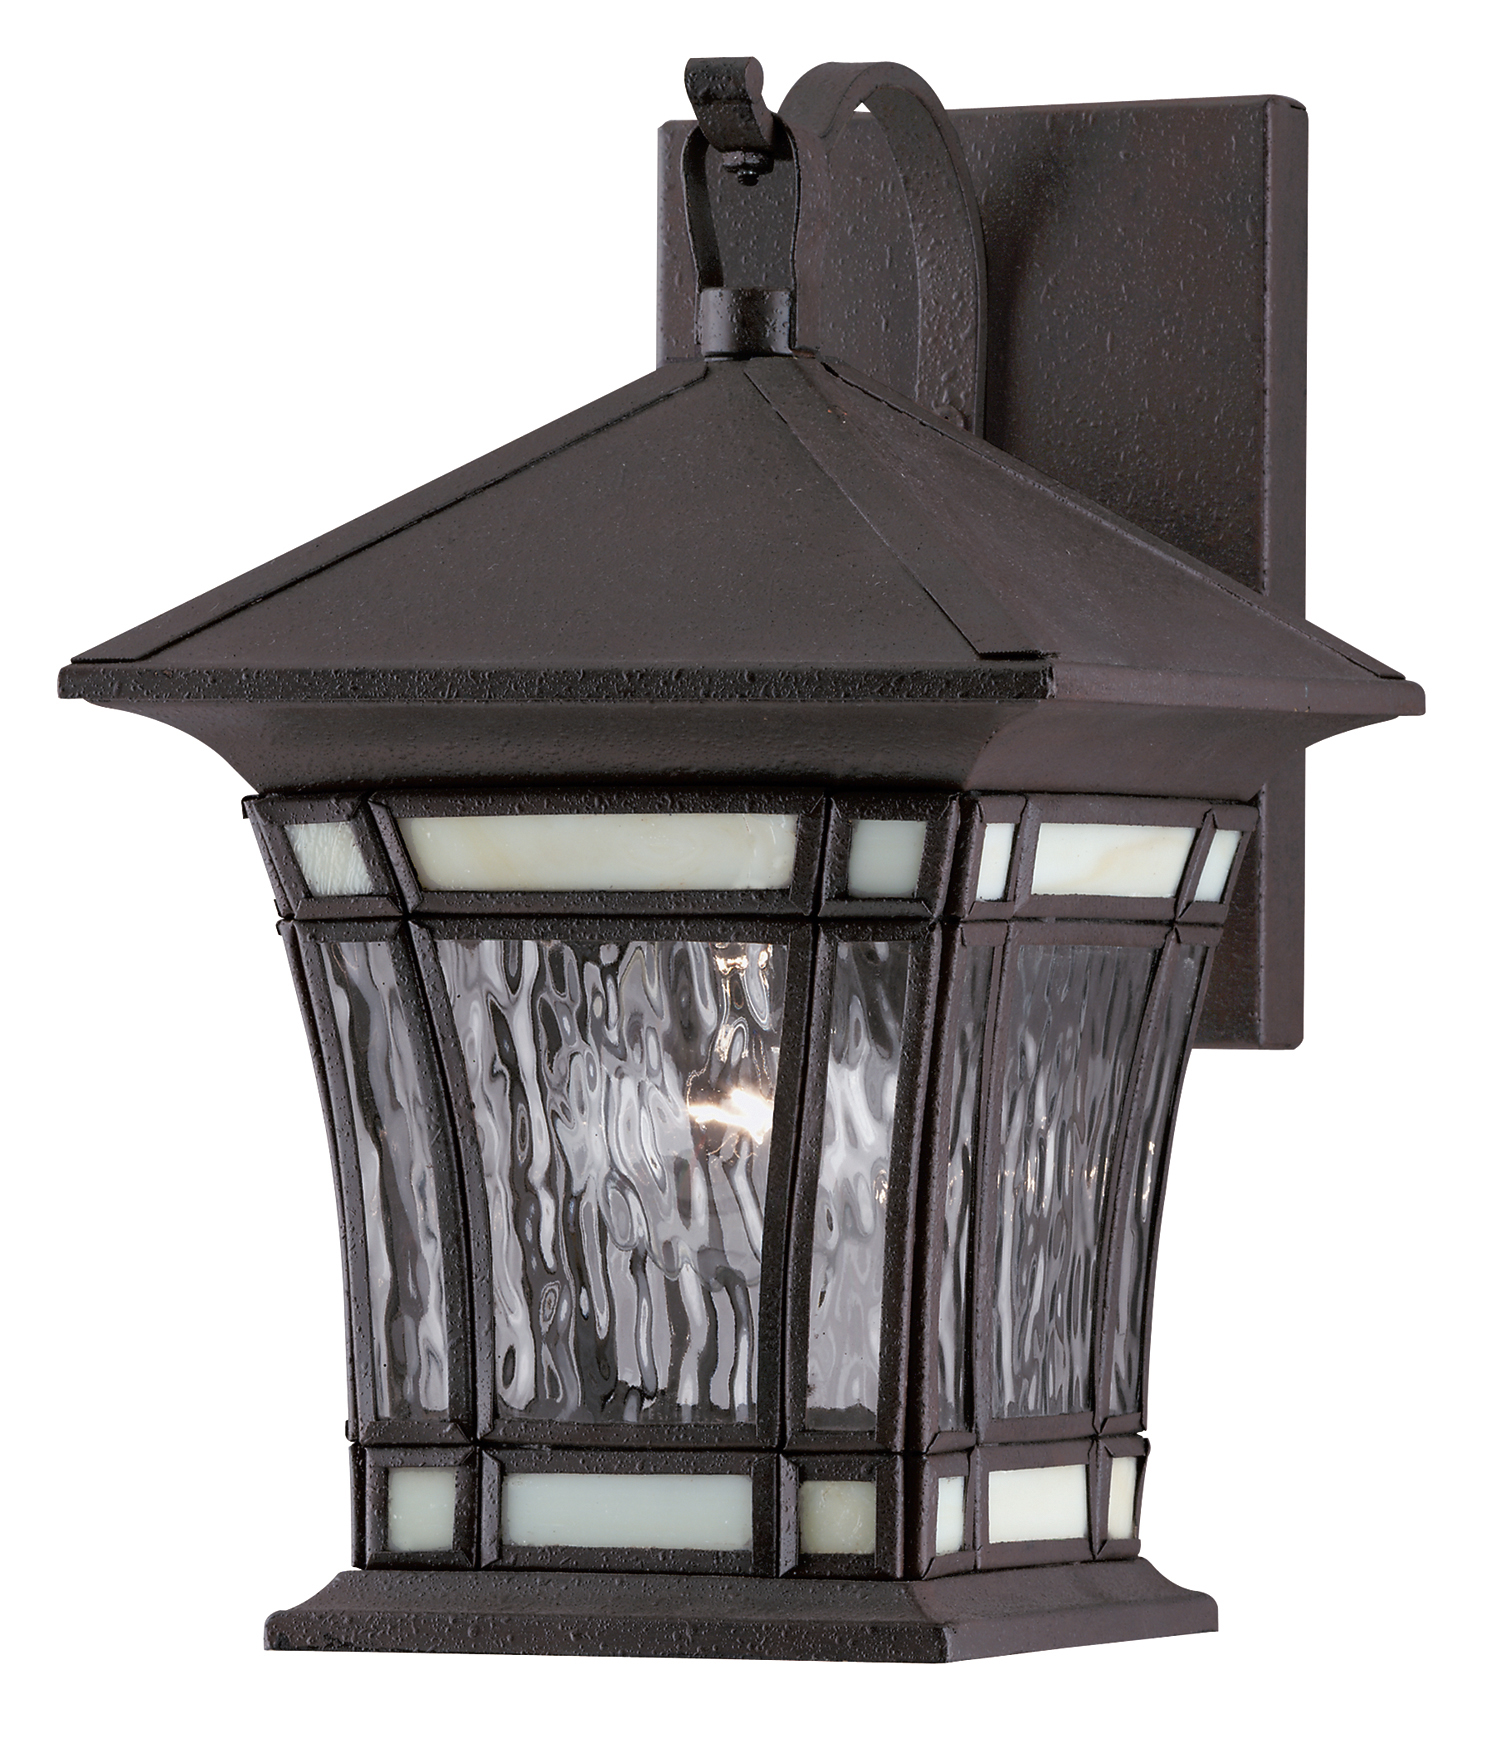 Westinghouse Lighting 6486400 Textured Rust Patina One-Light Exterior Wall Lante - image 1 of 3